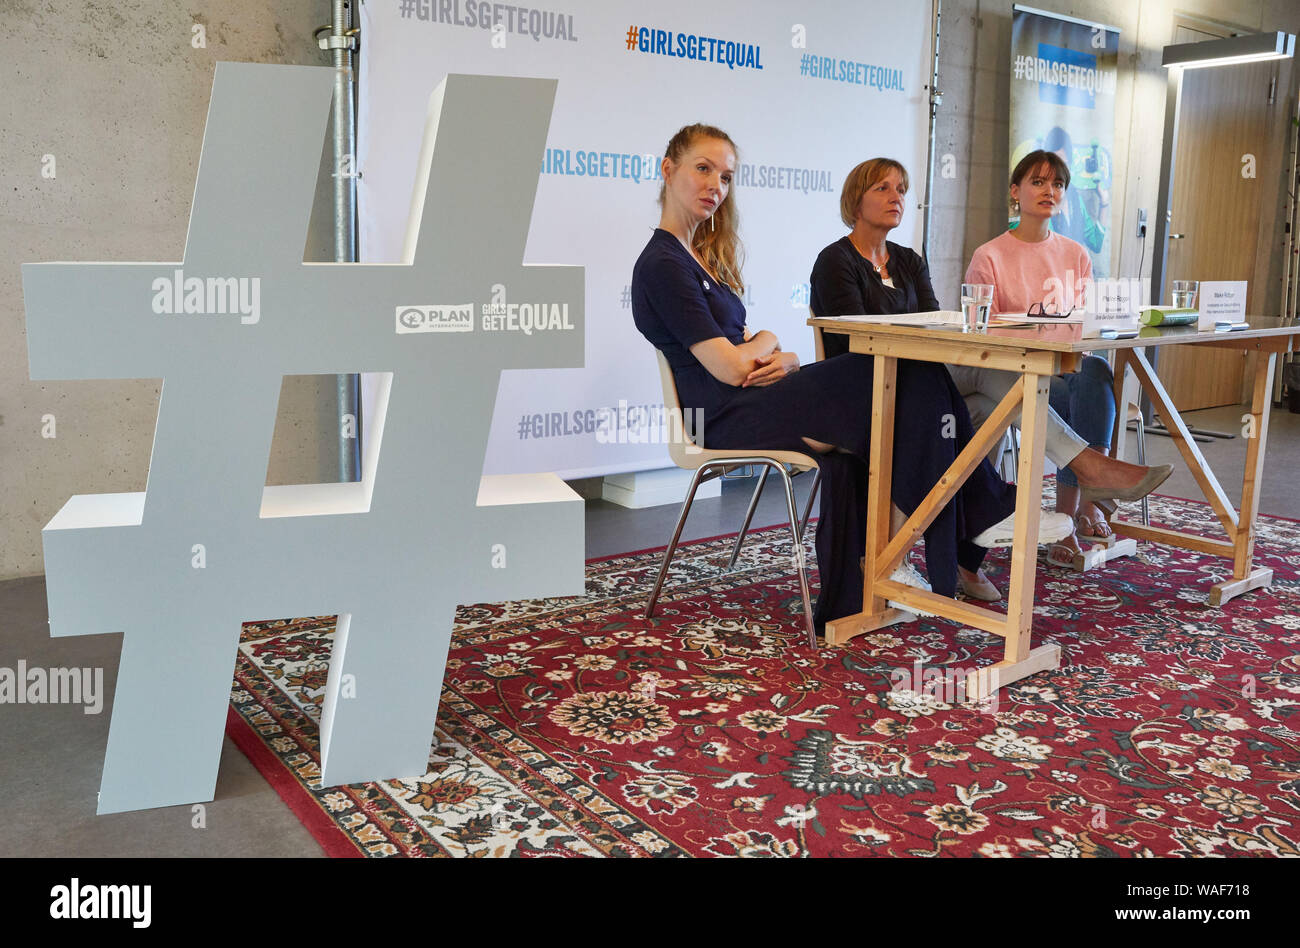 Hamburg, Germany. 20th Aug, 2019. Pheline Roggan (l-r), actress and Plan ambassador, Maike Röttger, Plan managing director, and Hannah Müller-Hillebrand, influencer and Plan ambassador, speak at a Plan International press conference on a survey on role models in the social media. Credit: Georg Wendt/dpa/Alamy Live News Stock Photo